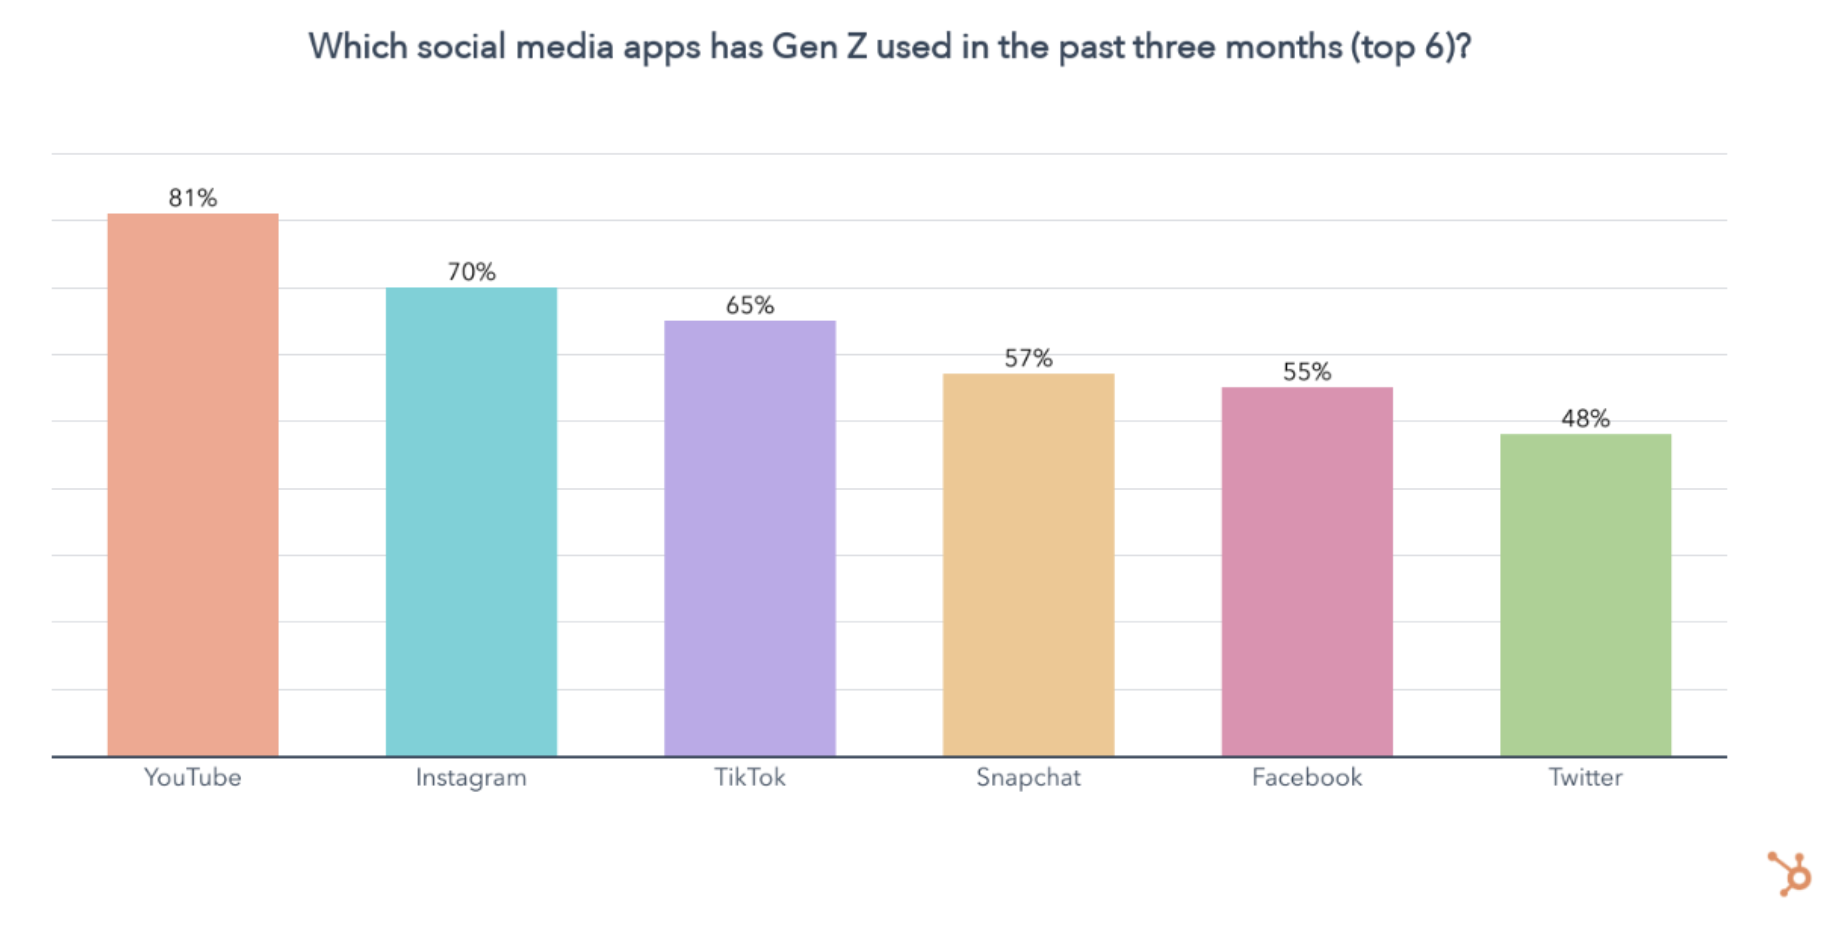 Graph showing YouTube as the most used social media app by Gen Z.